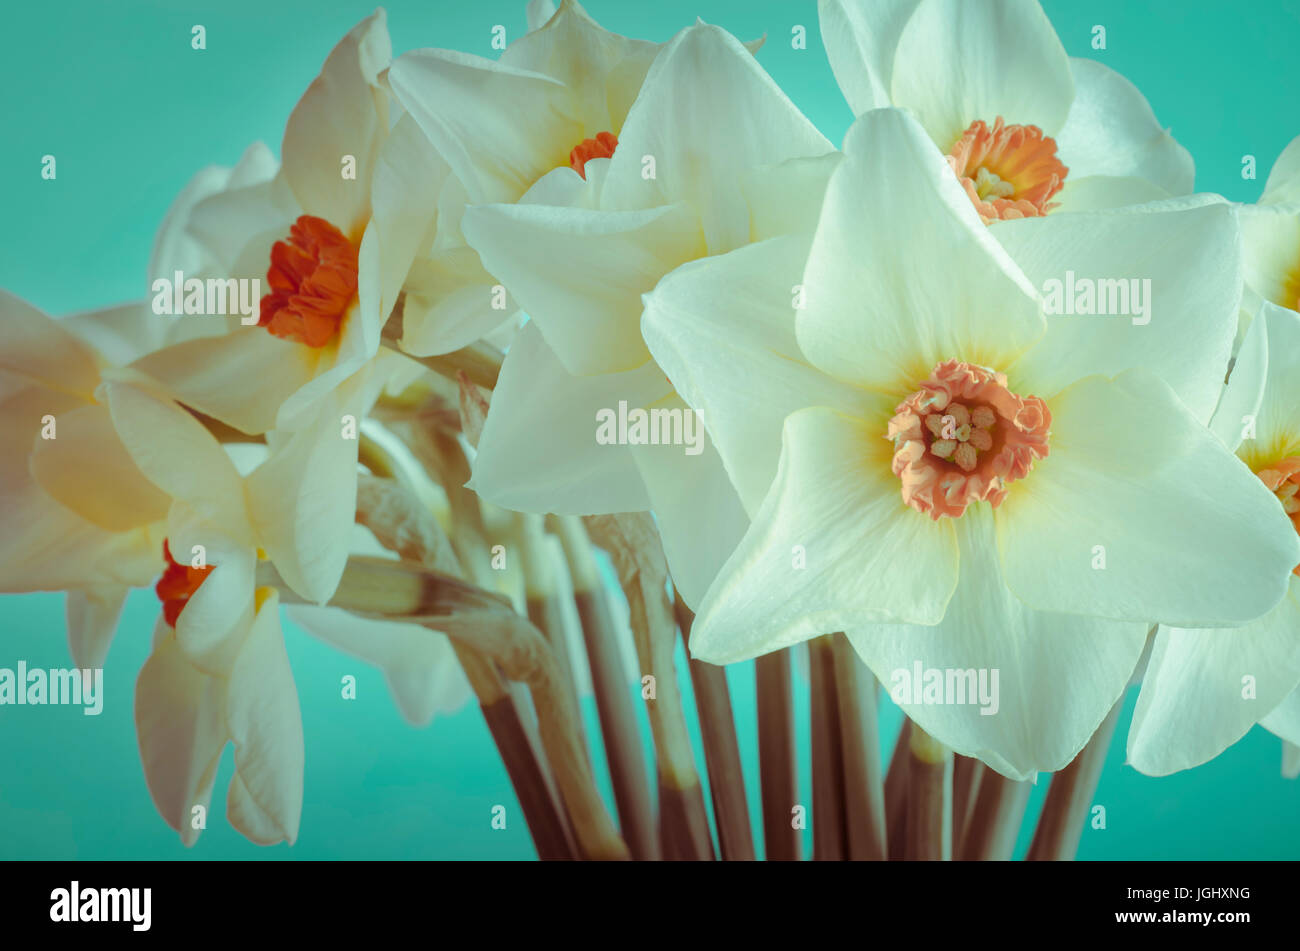 A bunch of cream hued Spring daffodils with orange trumpets,on a turquoise background, facing front and sides.  Cross processed for a fresh, yet retro Stock Photo